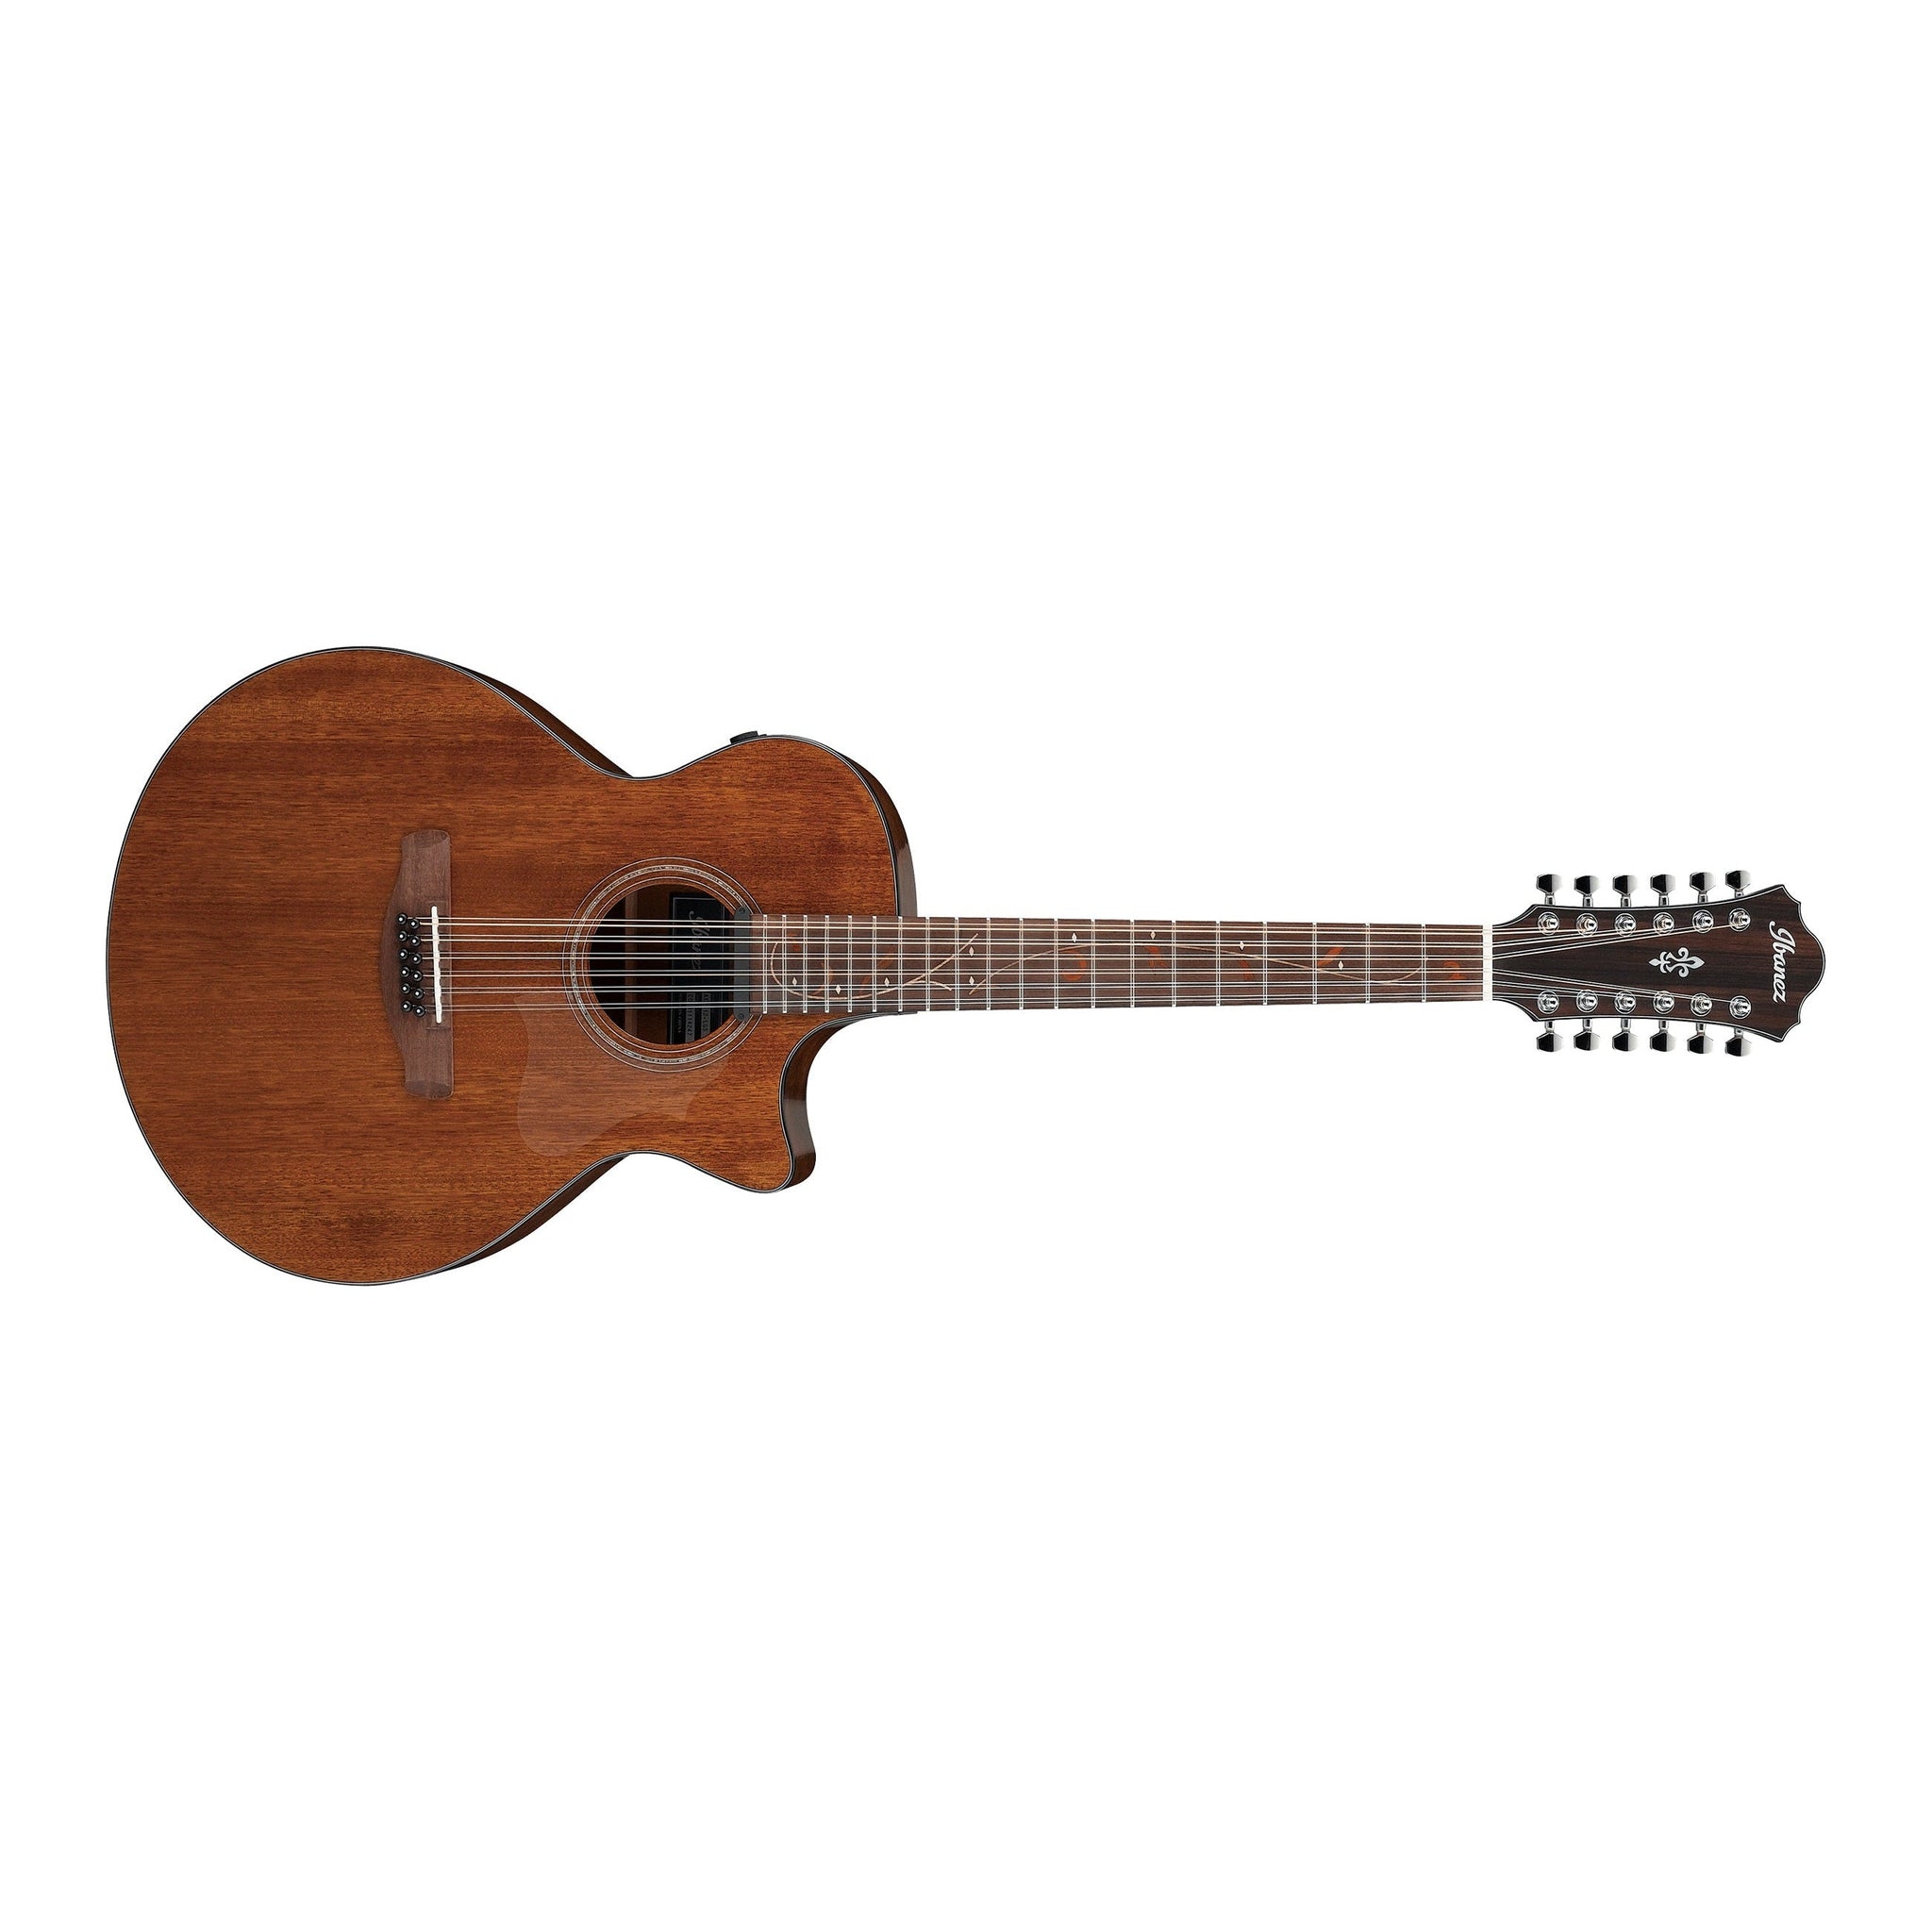 Ibanez AE2912-LGS AE Series 12-String Acoustic/Electric Guitar-Natural Low Gloss-Music World Academy